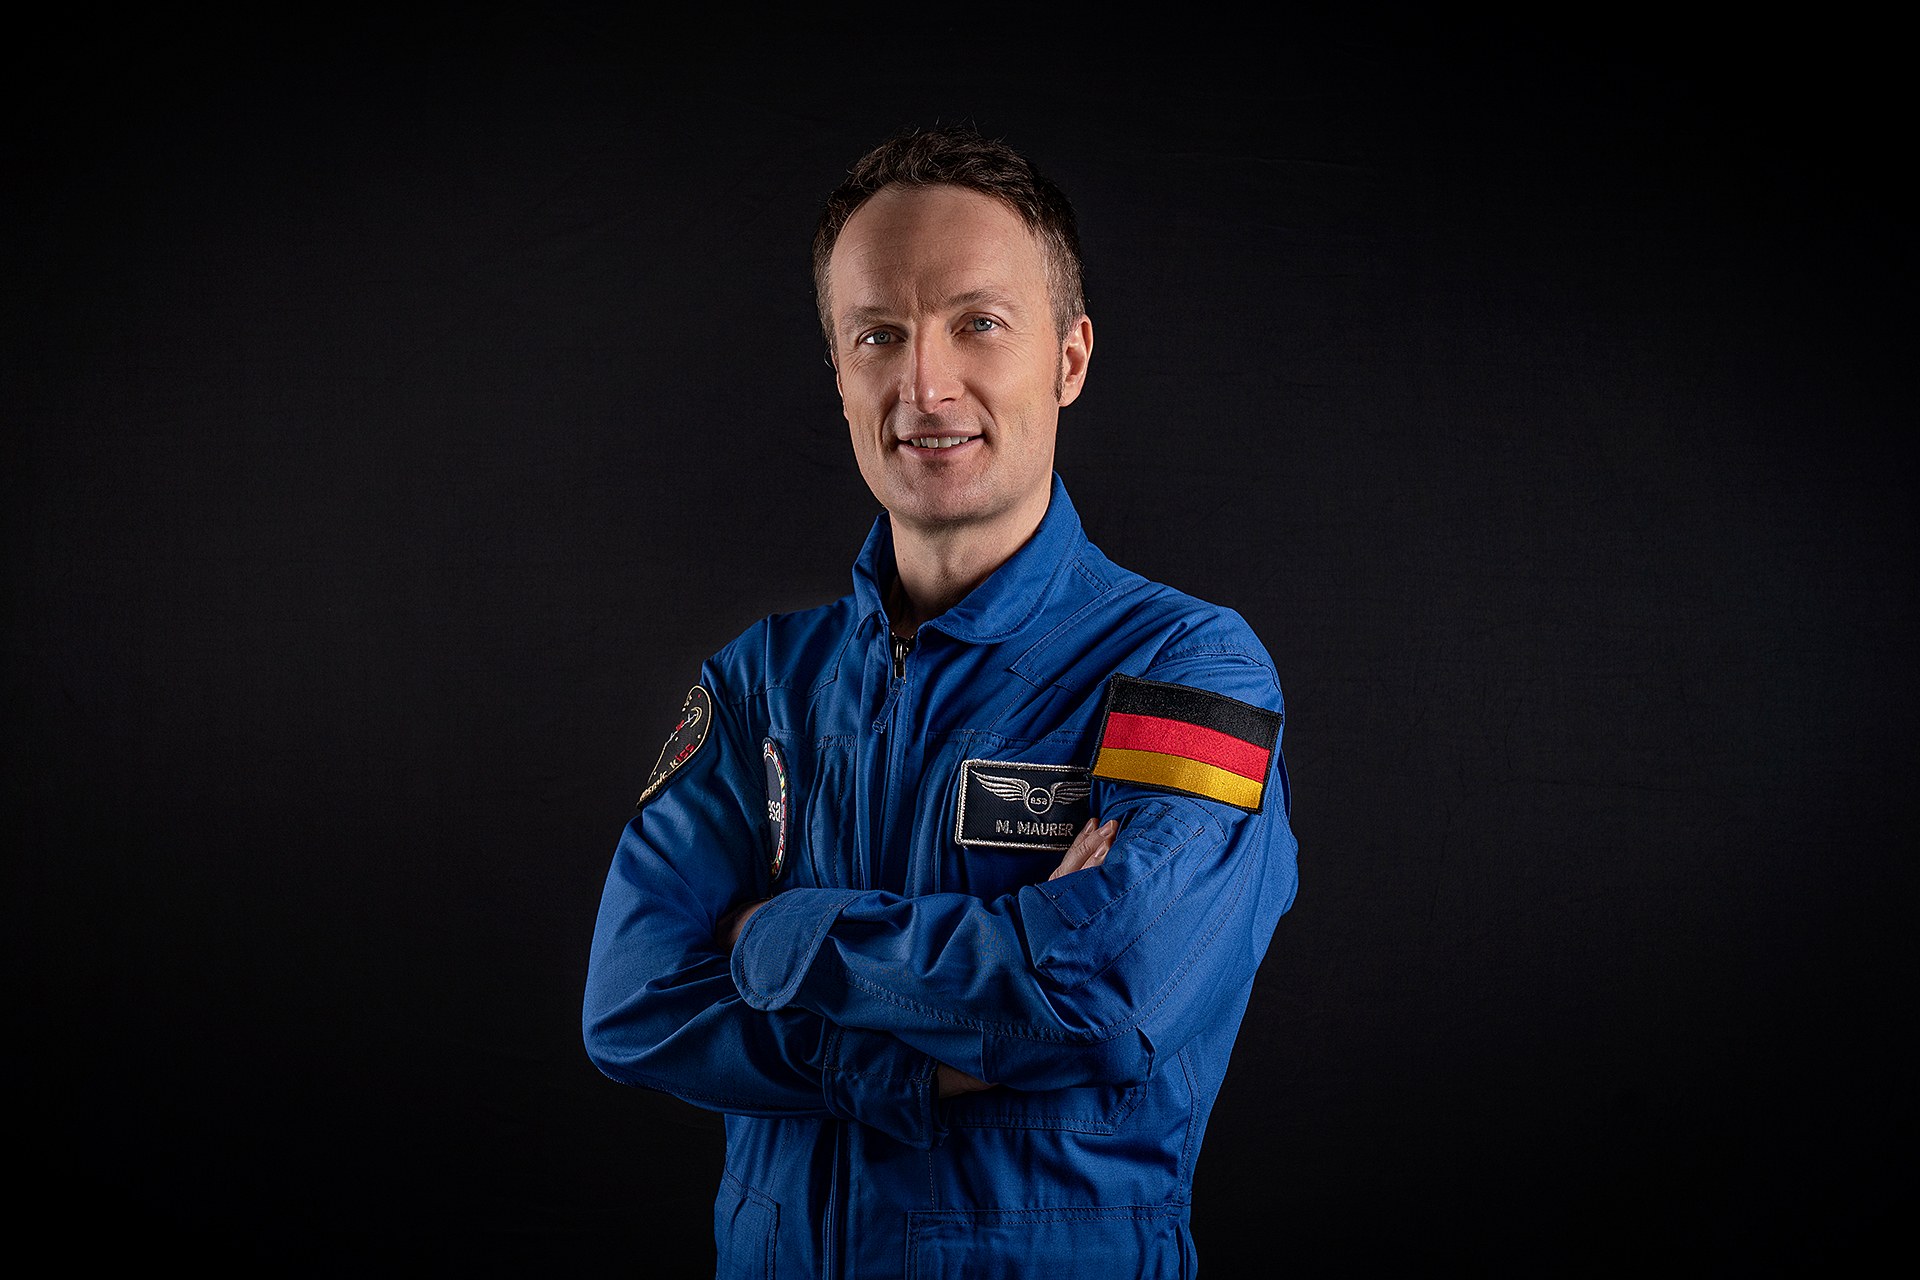 Matthias Maurer will fly to the ISS in autumn 2021